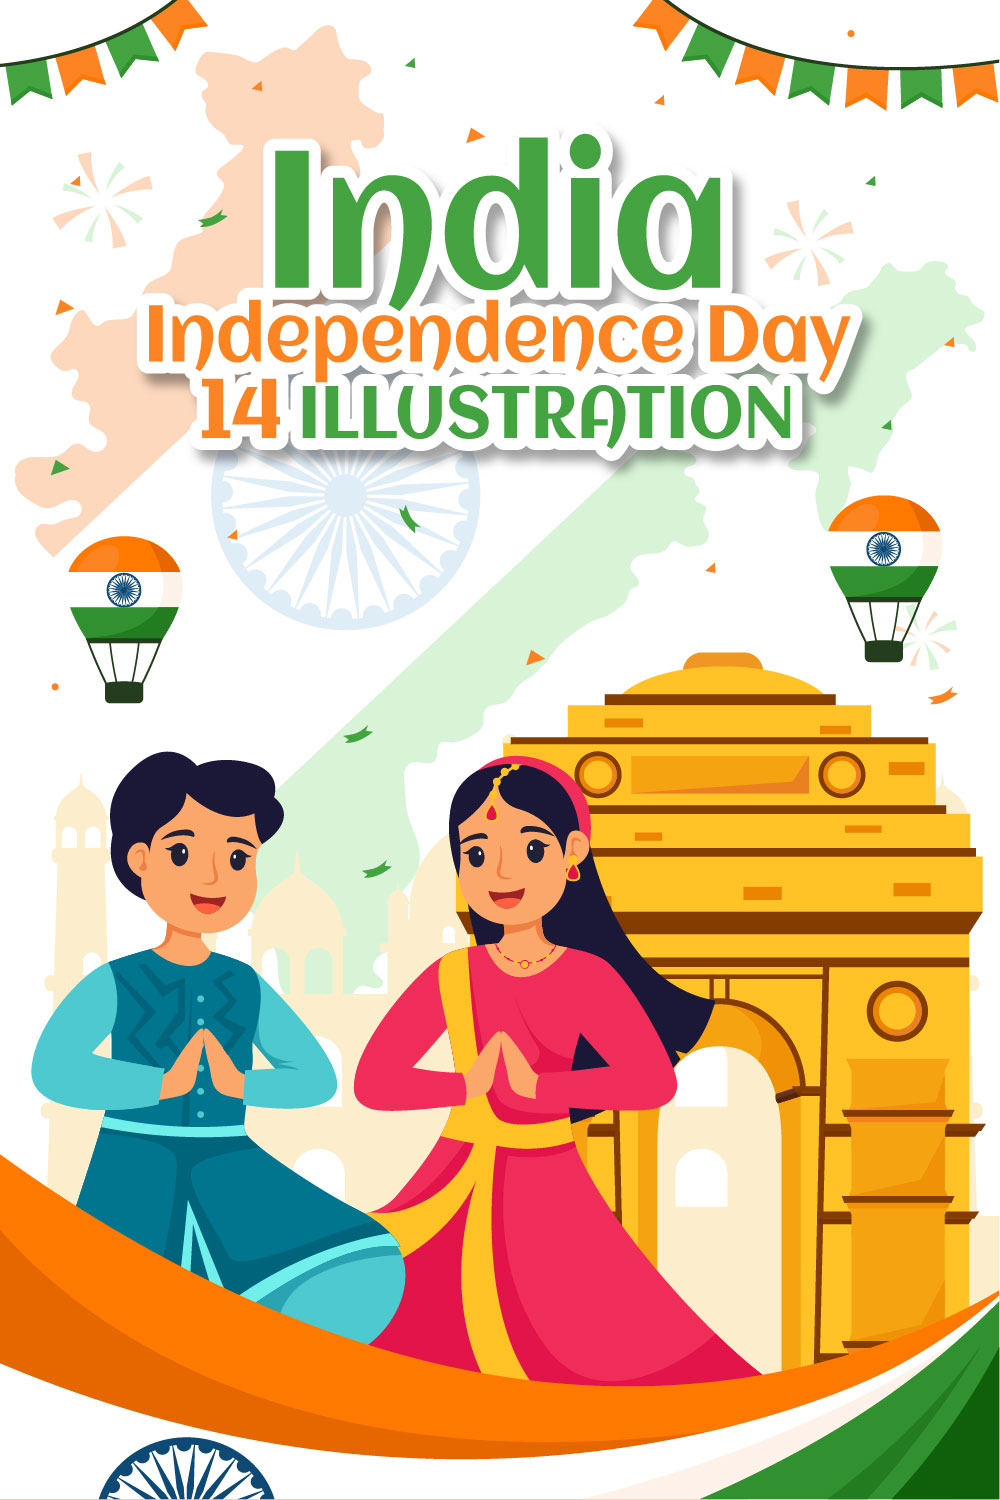 14 India Independence Day Illustration pinterest preview image.